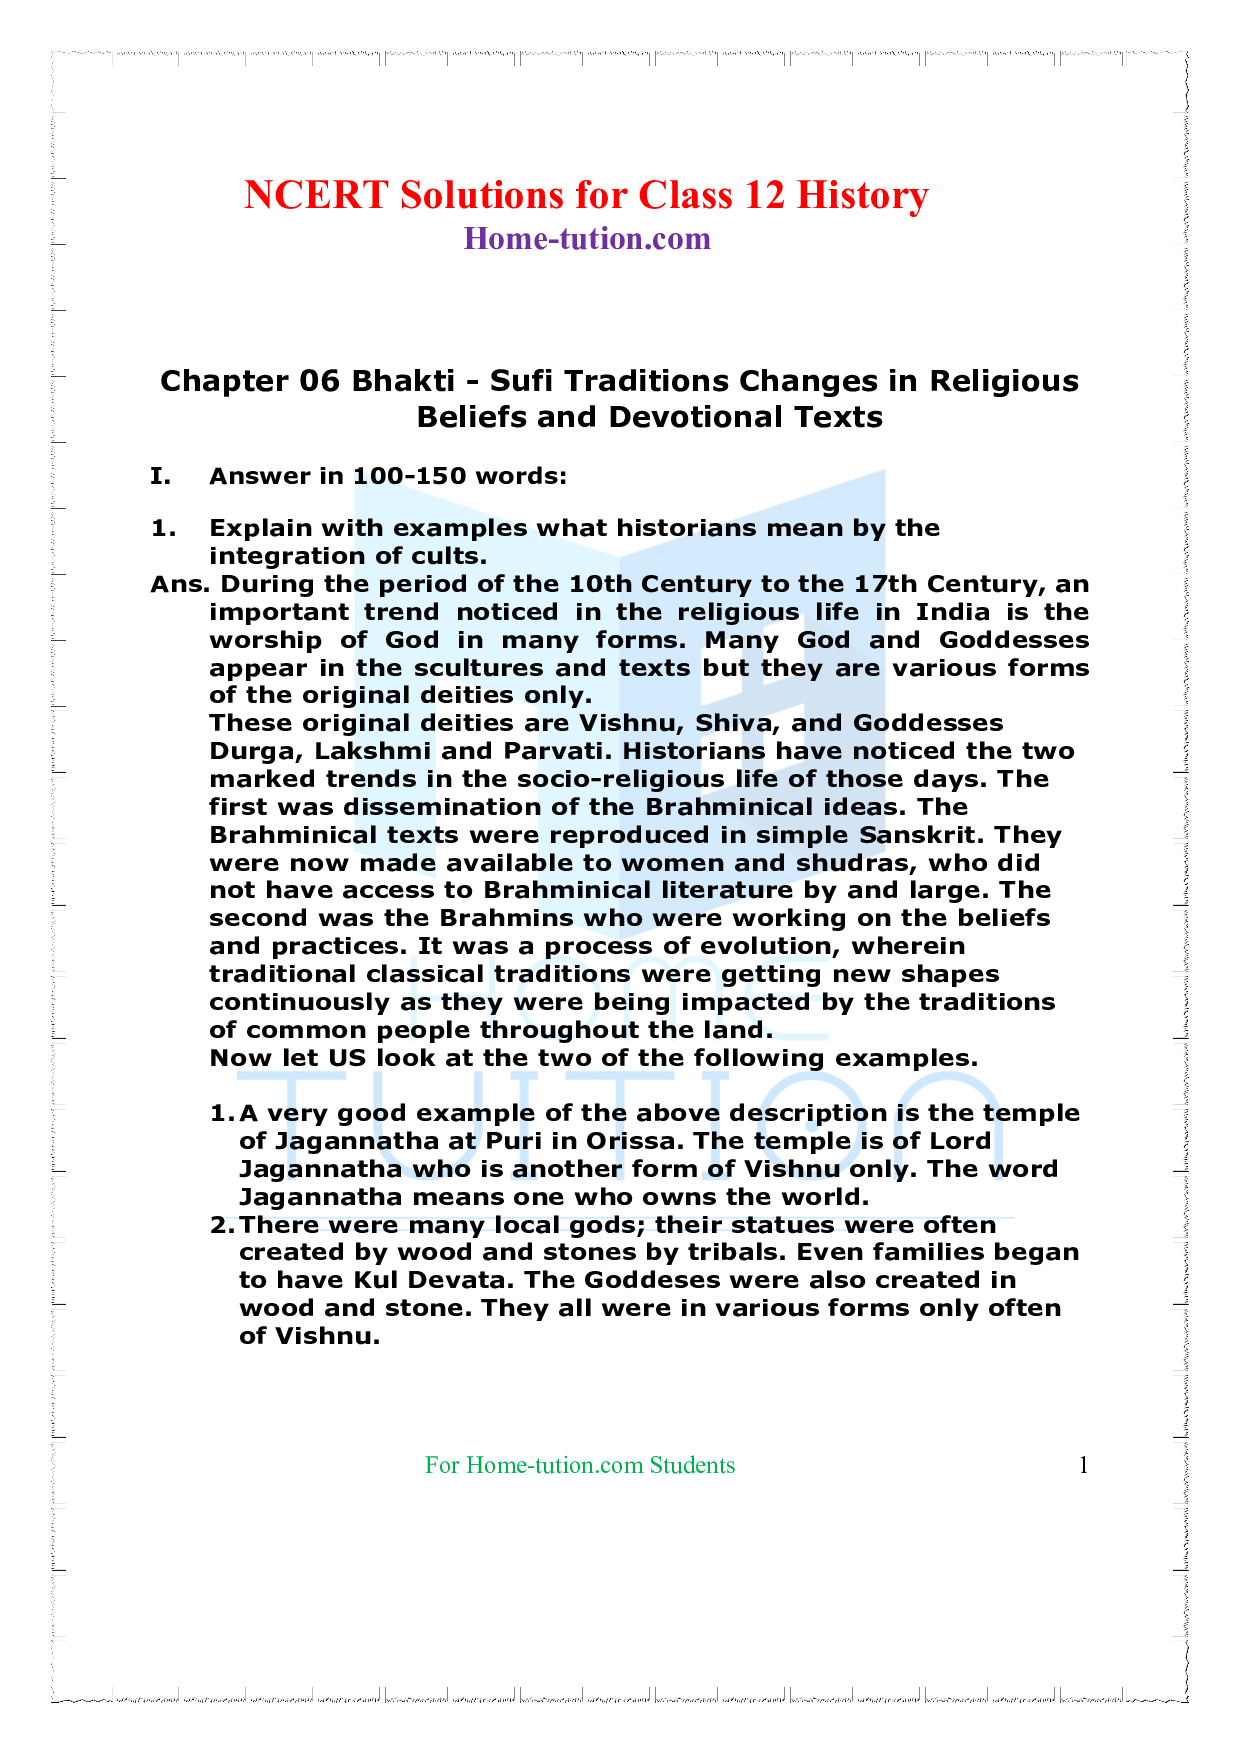 NCERT Solutions Chapter 6 Bhakti-Sufi traditions Changes in religious beliefs and devotional texts